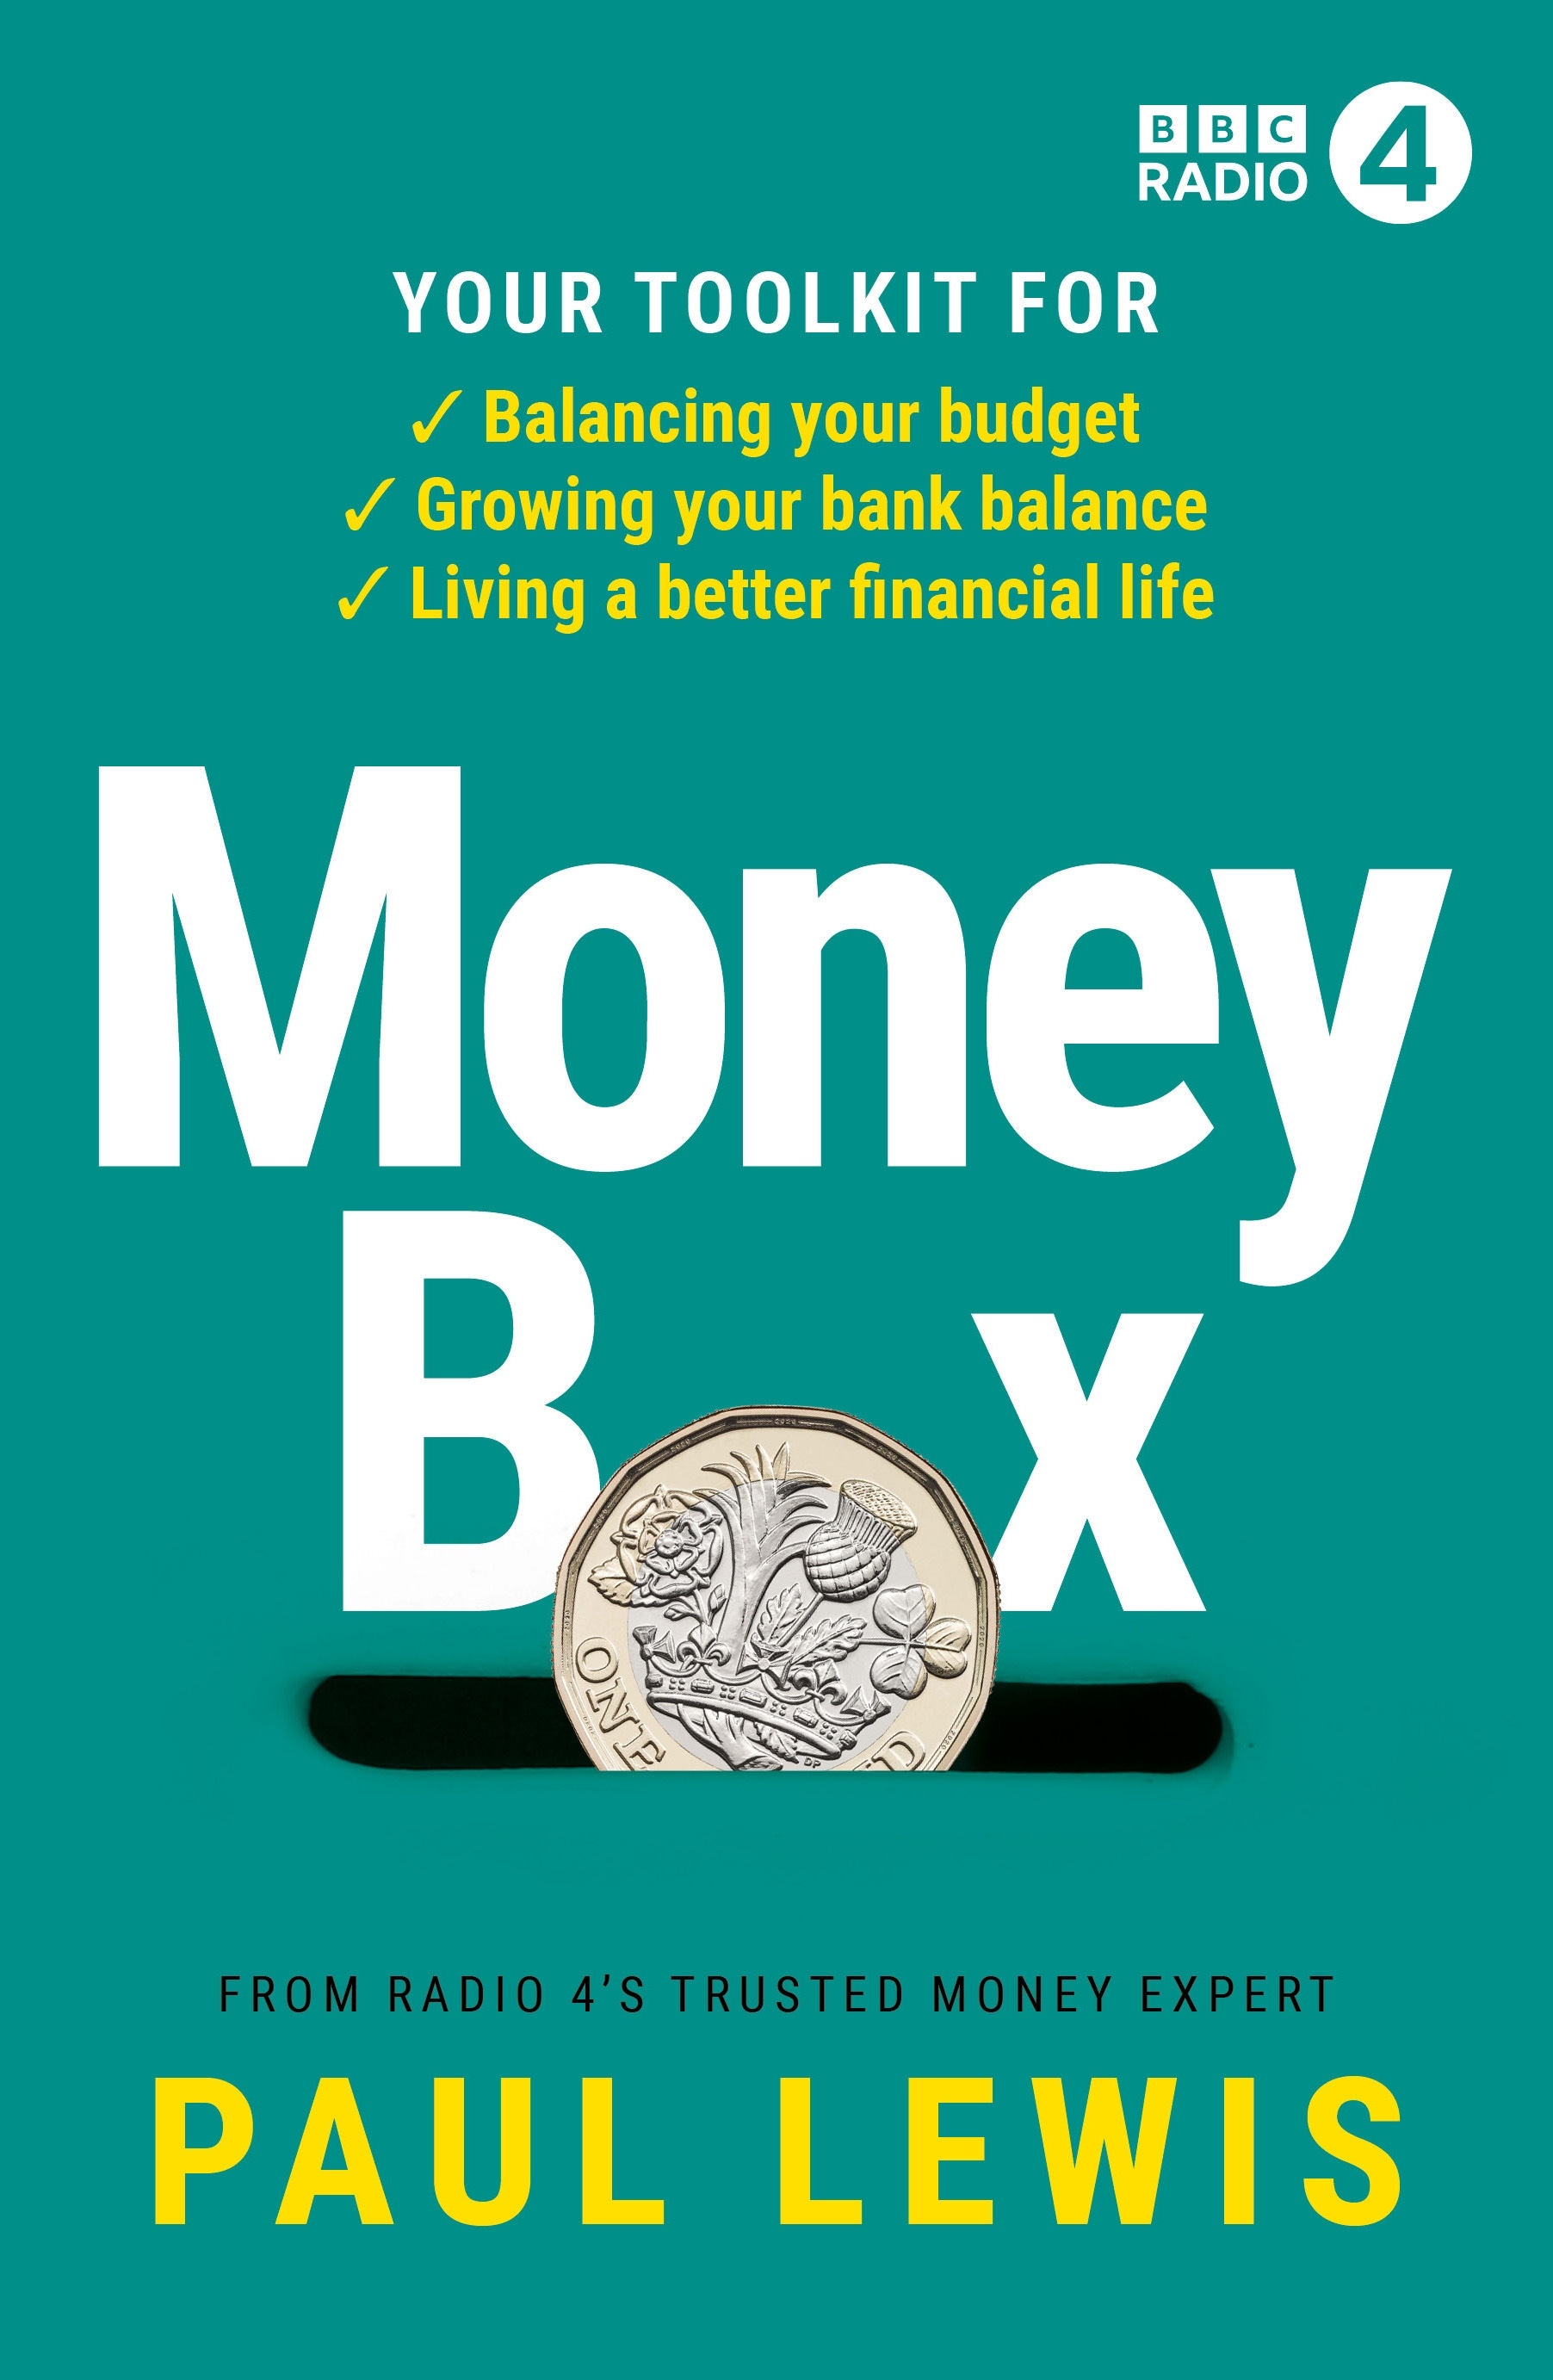 Book “Money Box” by Paul Lewis — January 12, 2023